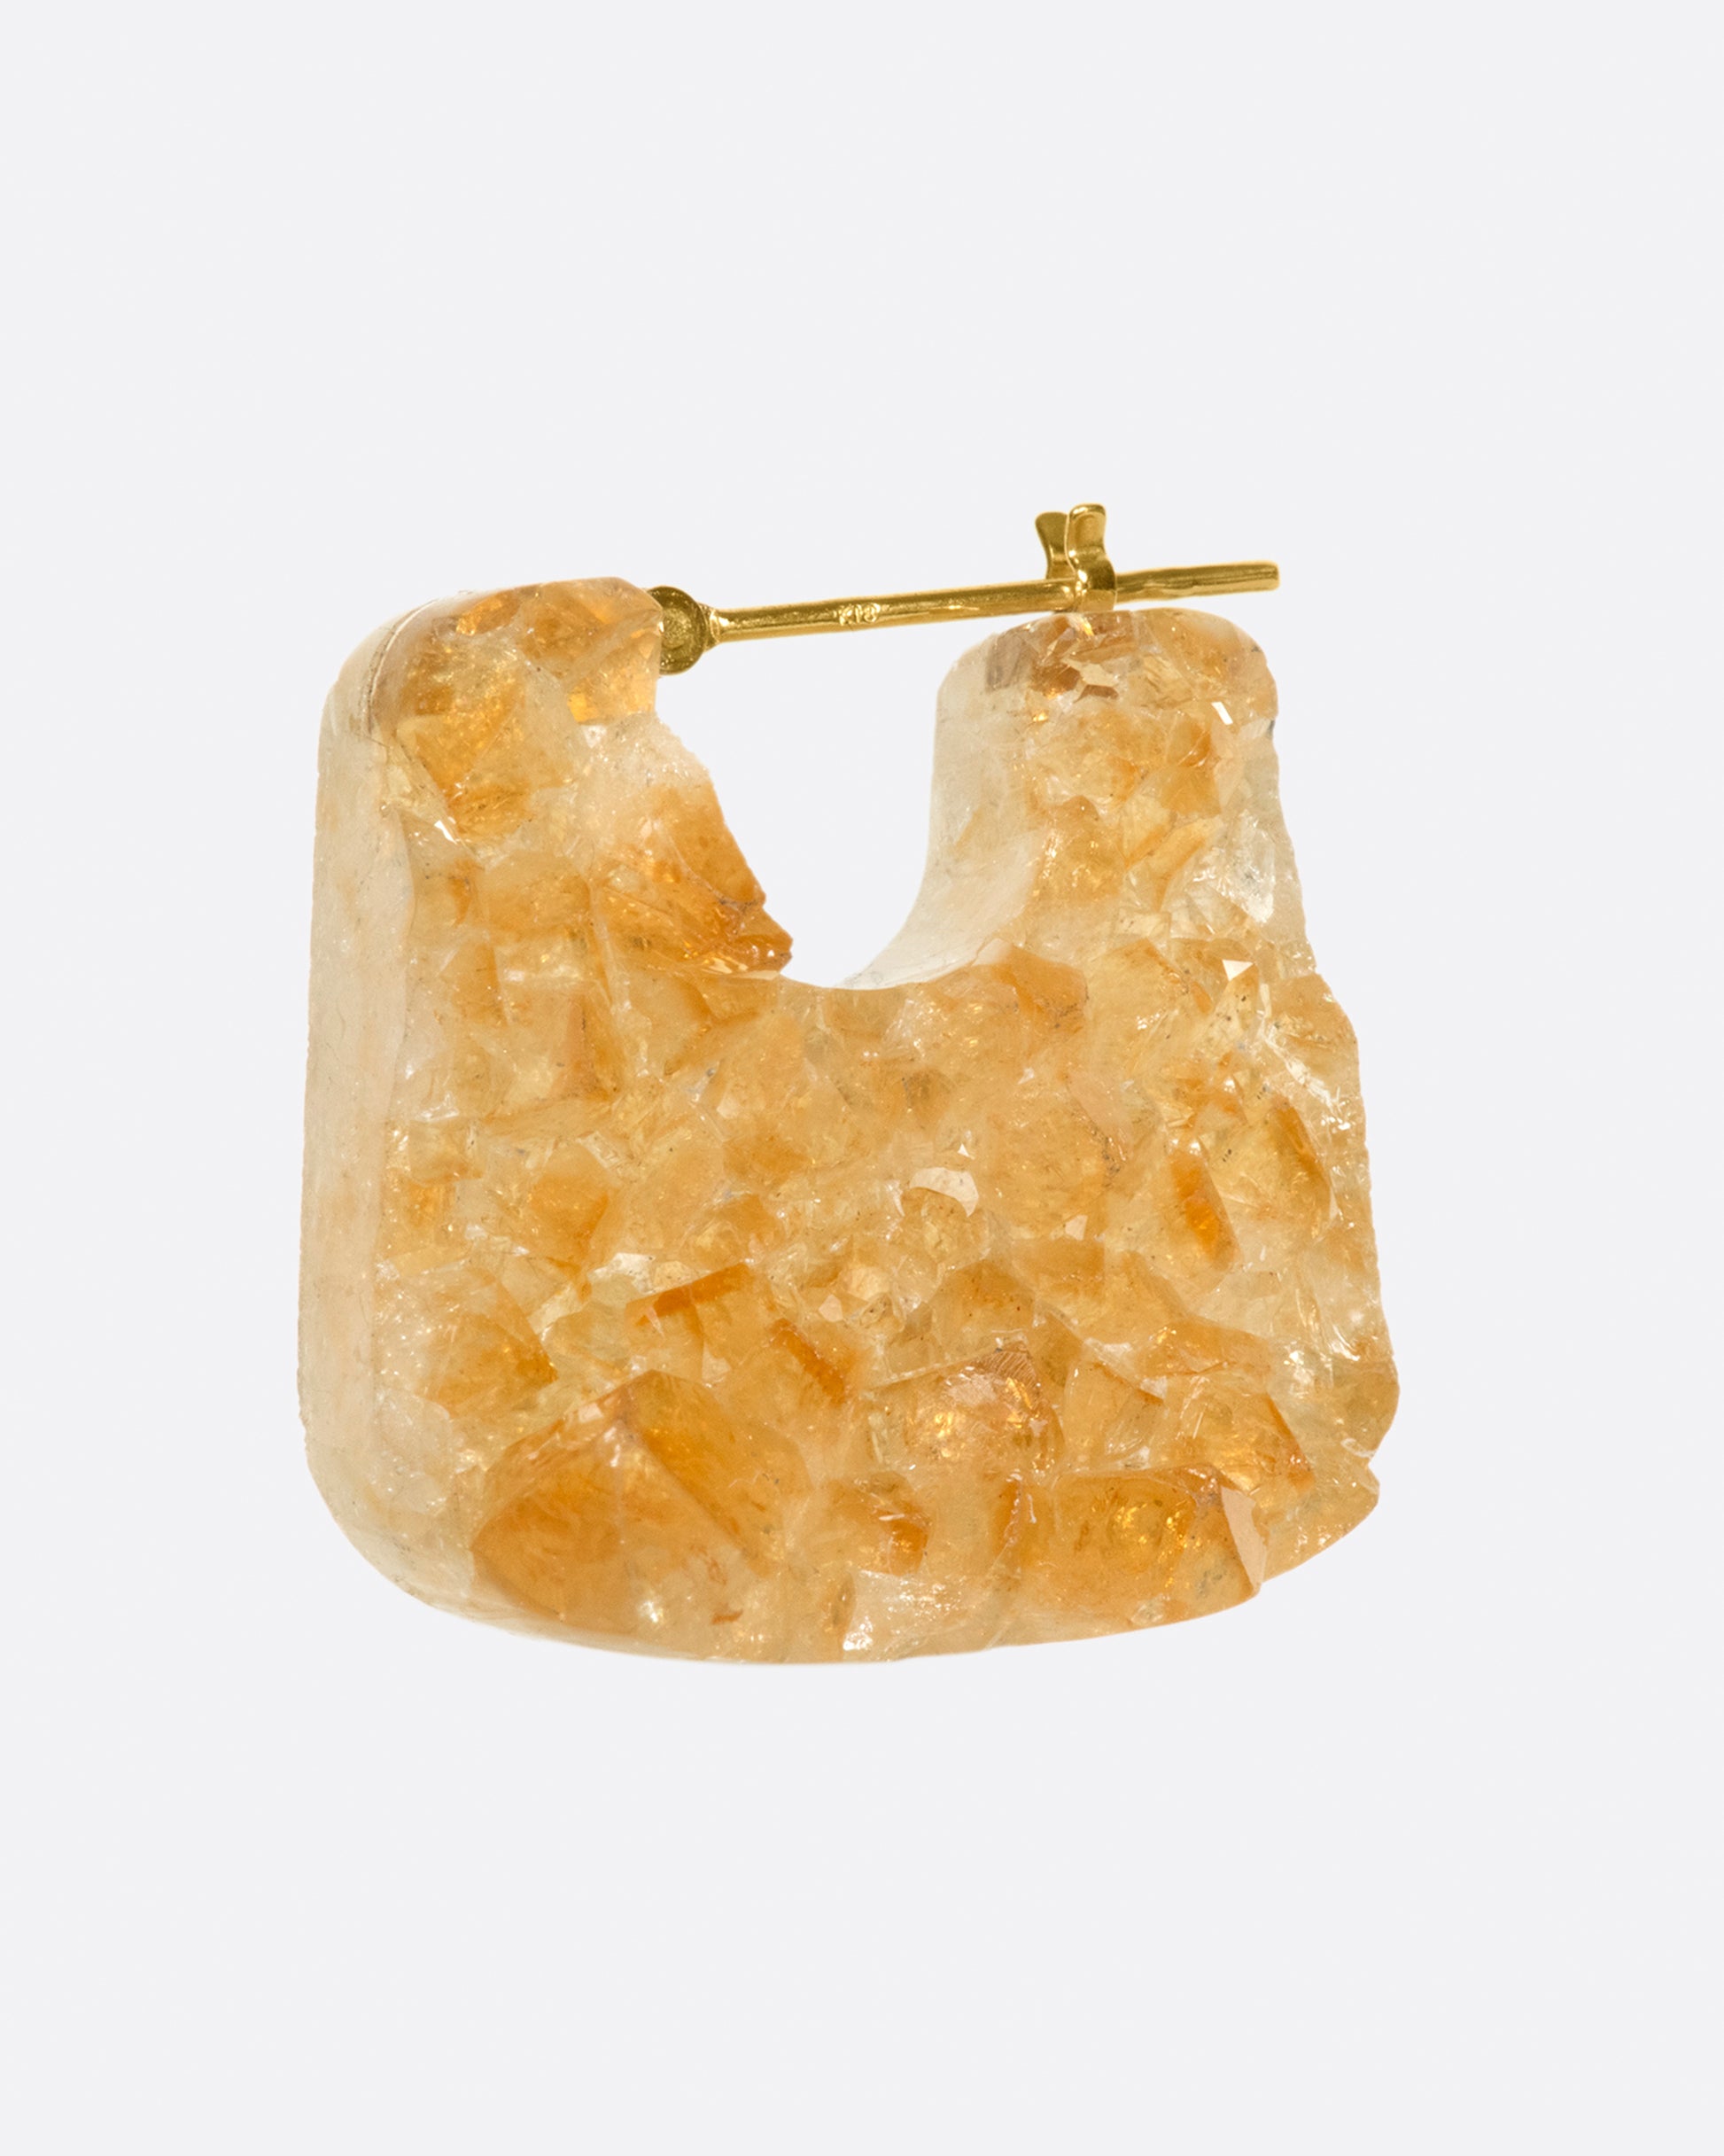 The shape of this earring celebrates the raw natural stone.